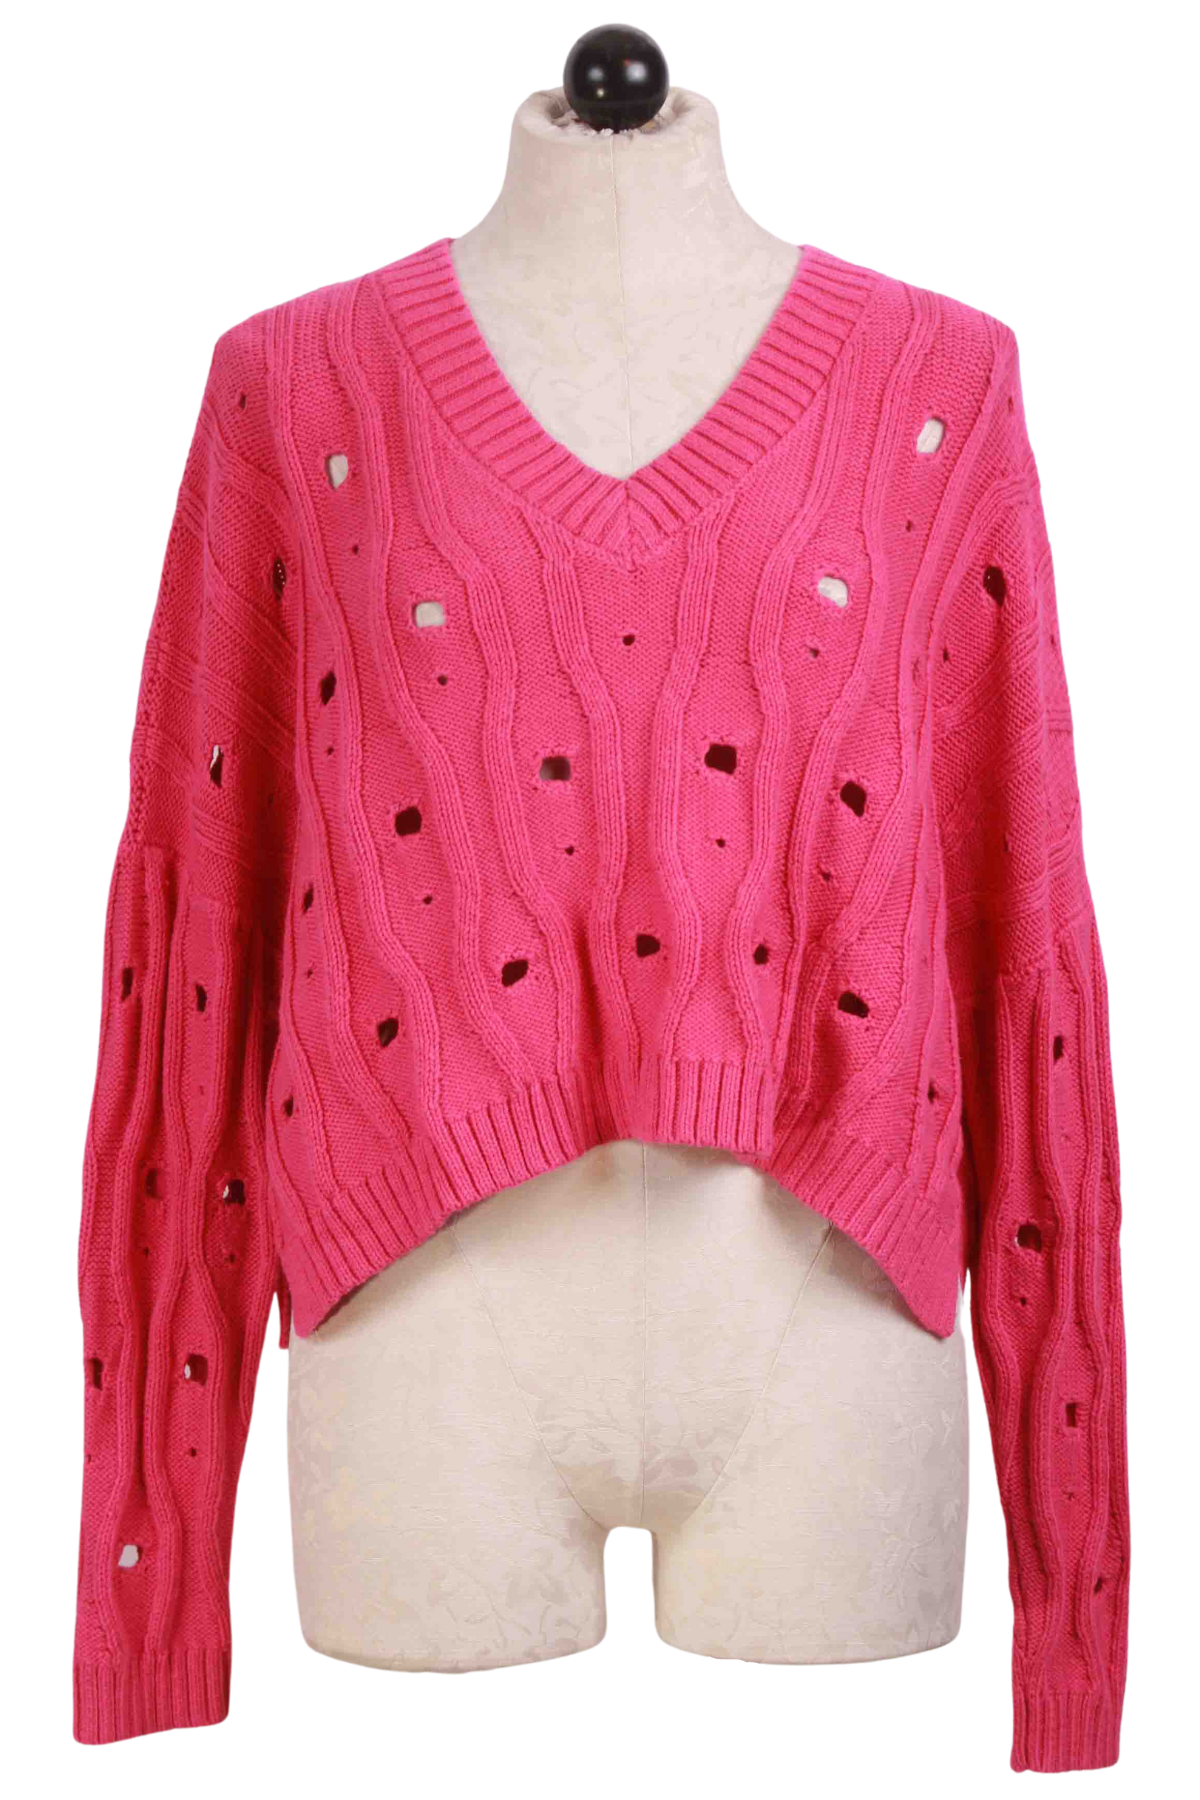 Lipstick Moth Cropped Sweater by Planet 